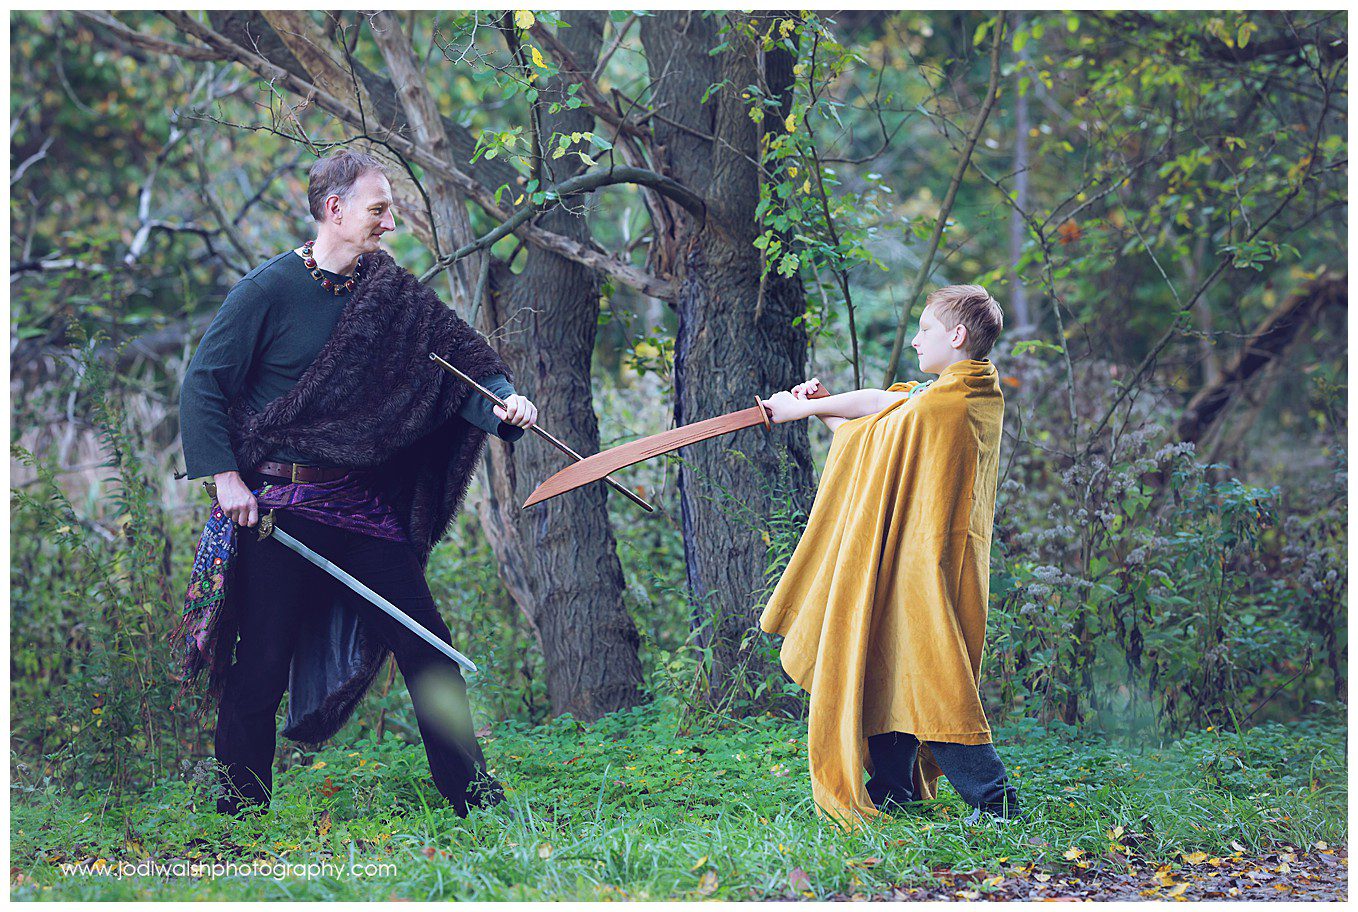 image of a father and son dressed in costumes with capes having a pretend sword fight in the woods of Schenley park. The boy is early teens and is wearing a long gold cape and holding a wooden sword as his dad blocks the strike.